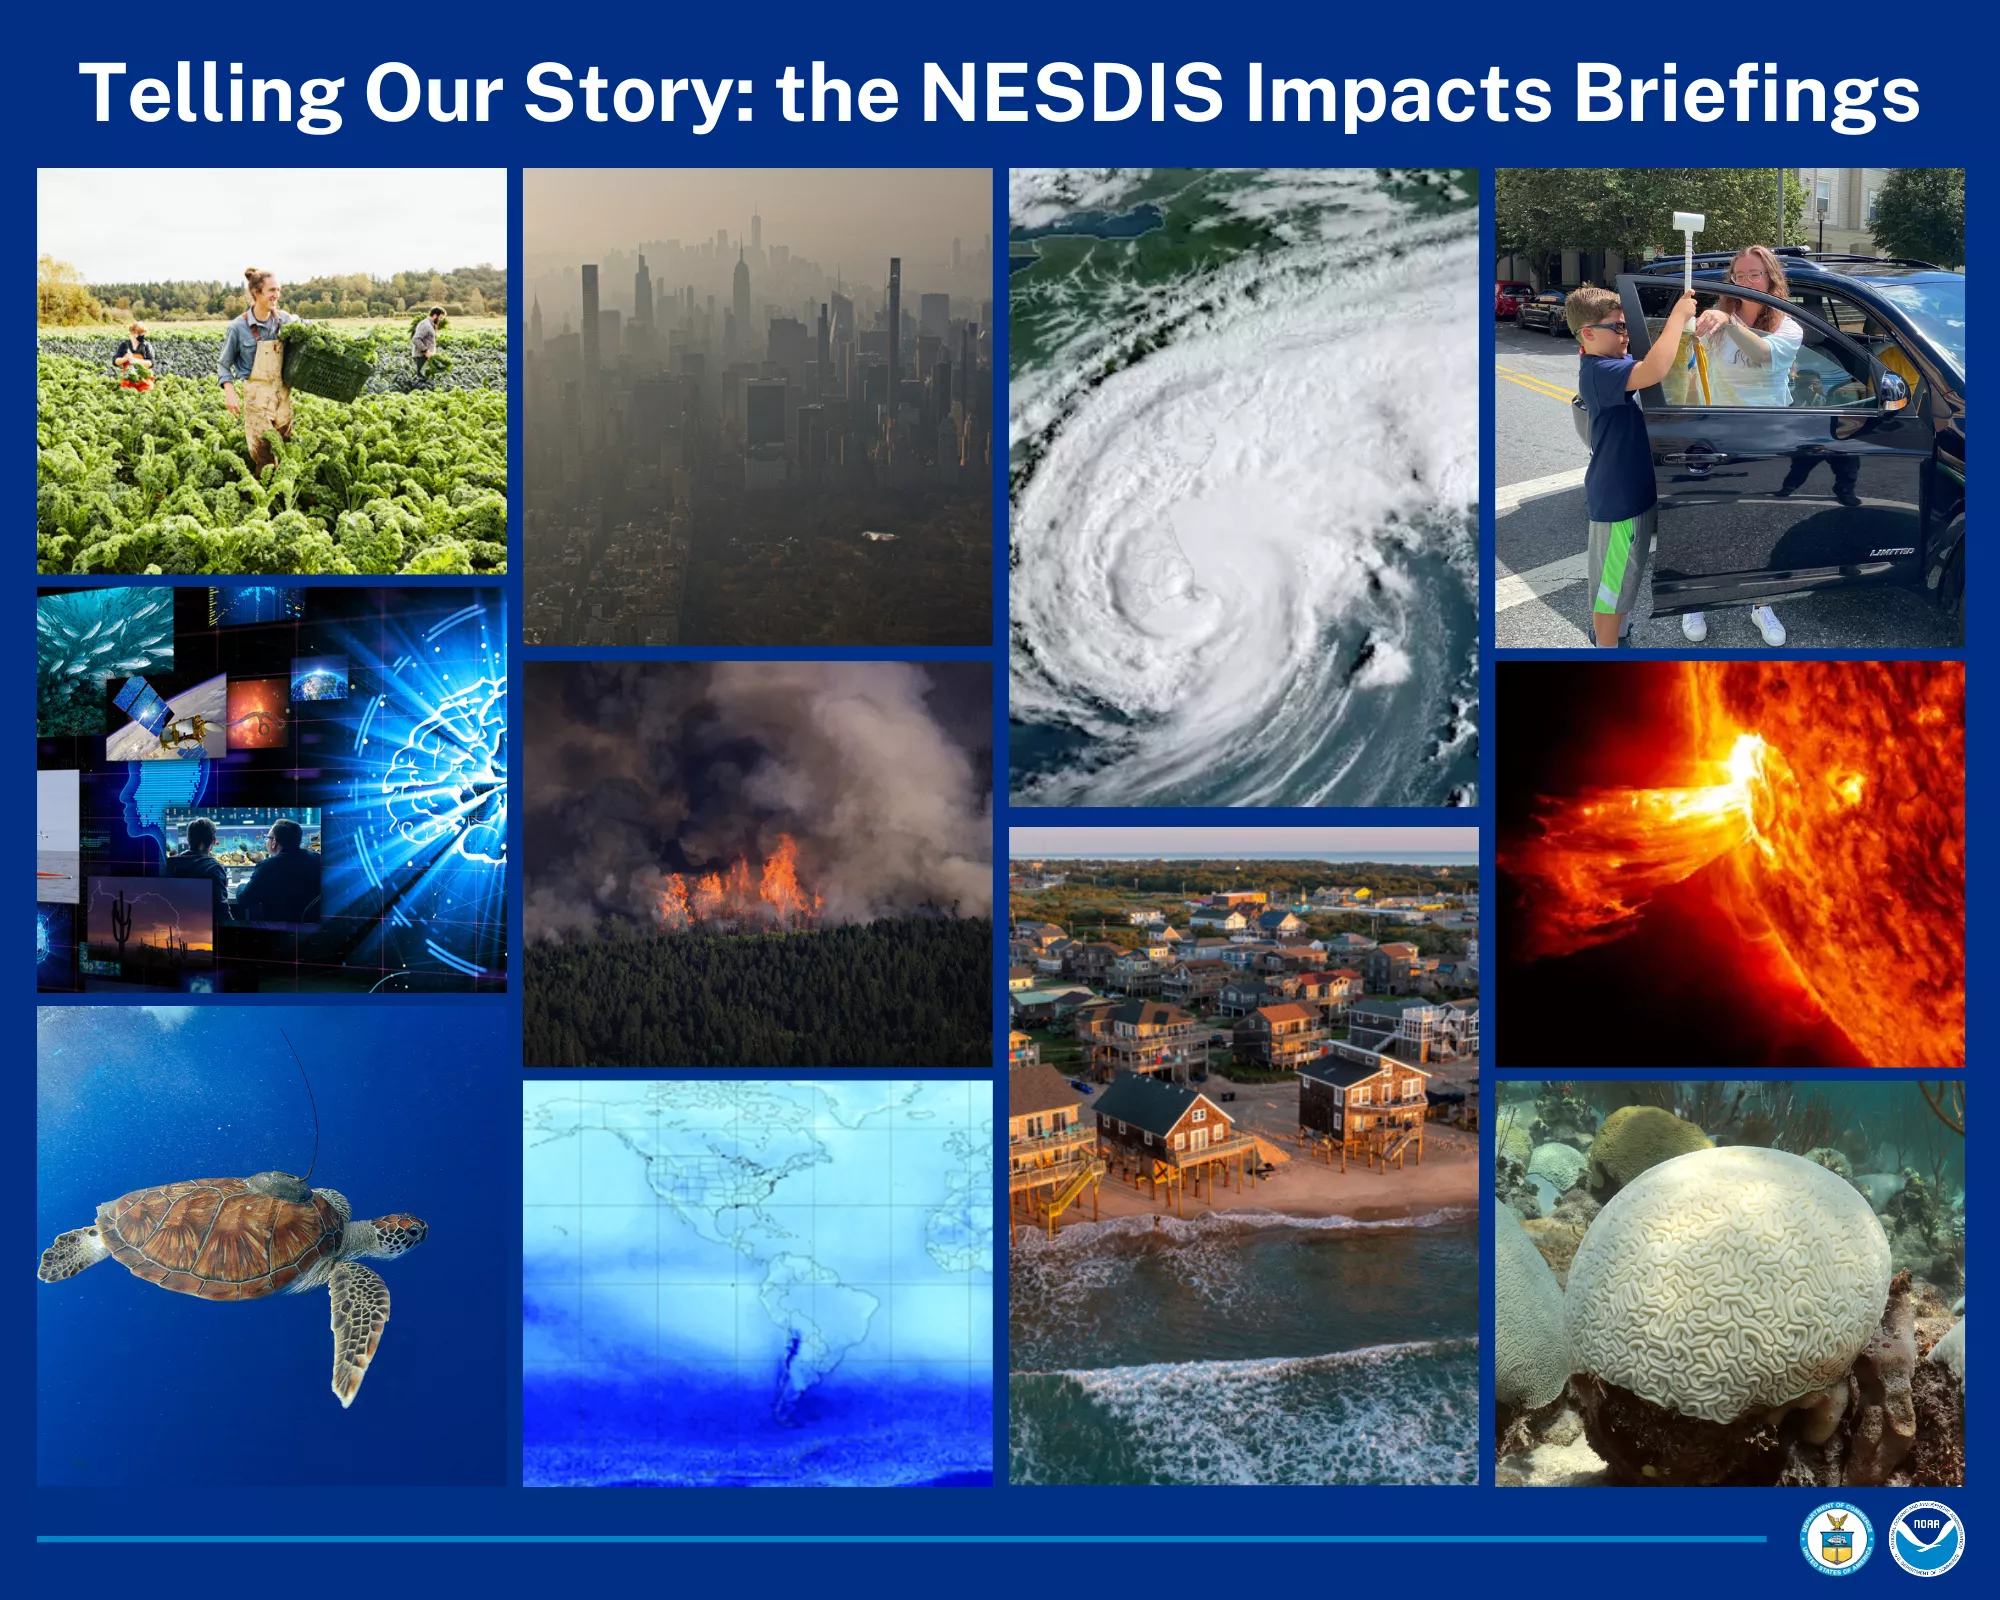 NESDIS Impacts Briefings Collage